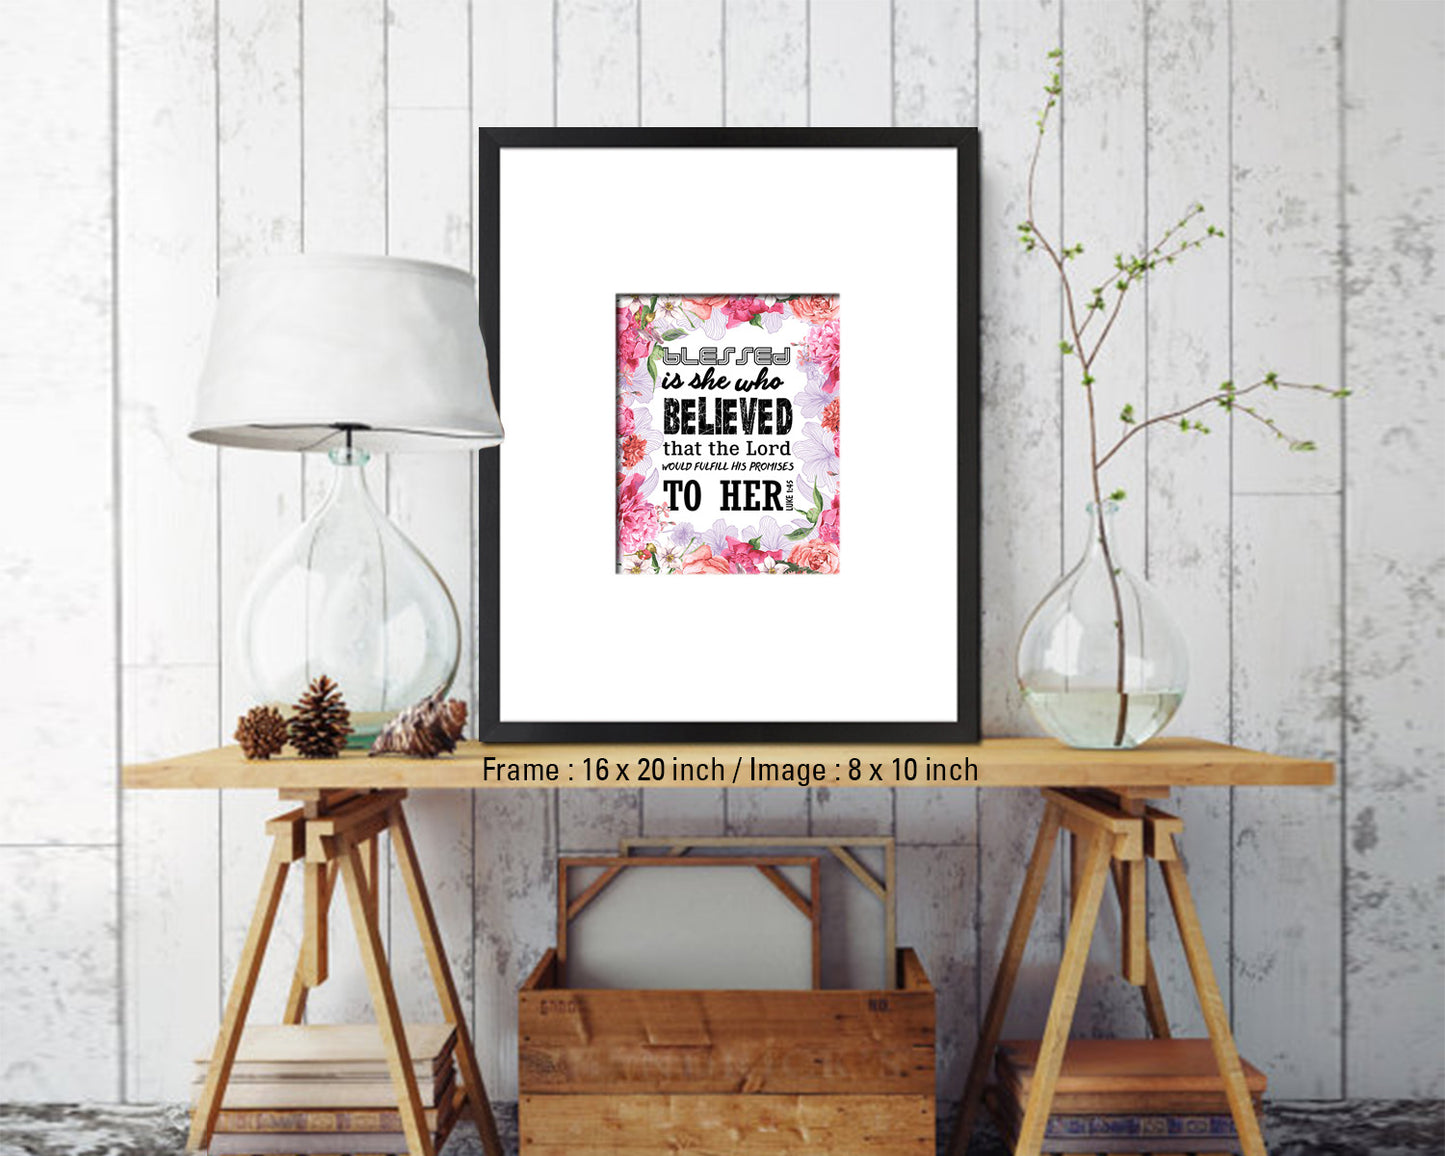 Blessed is she who believed that the Lord Quote Wood Framed Print Home Decor Wall Art Gifts